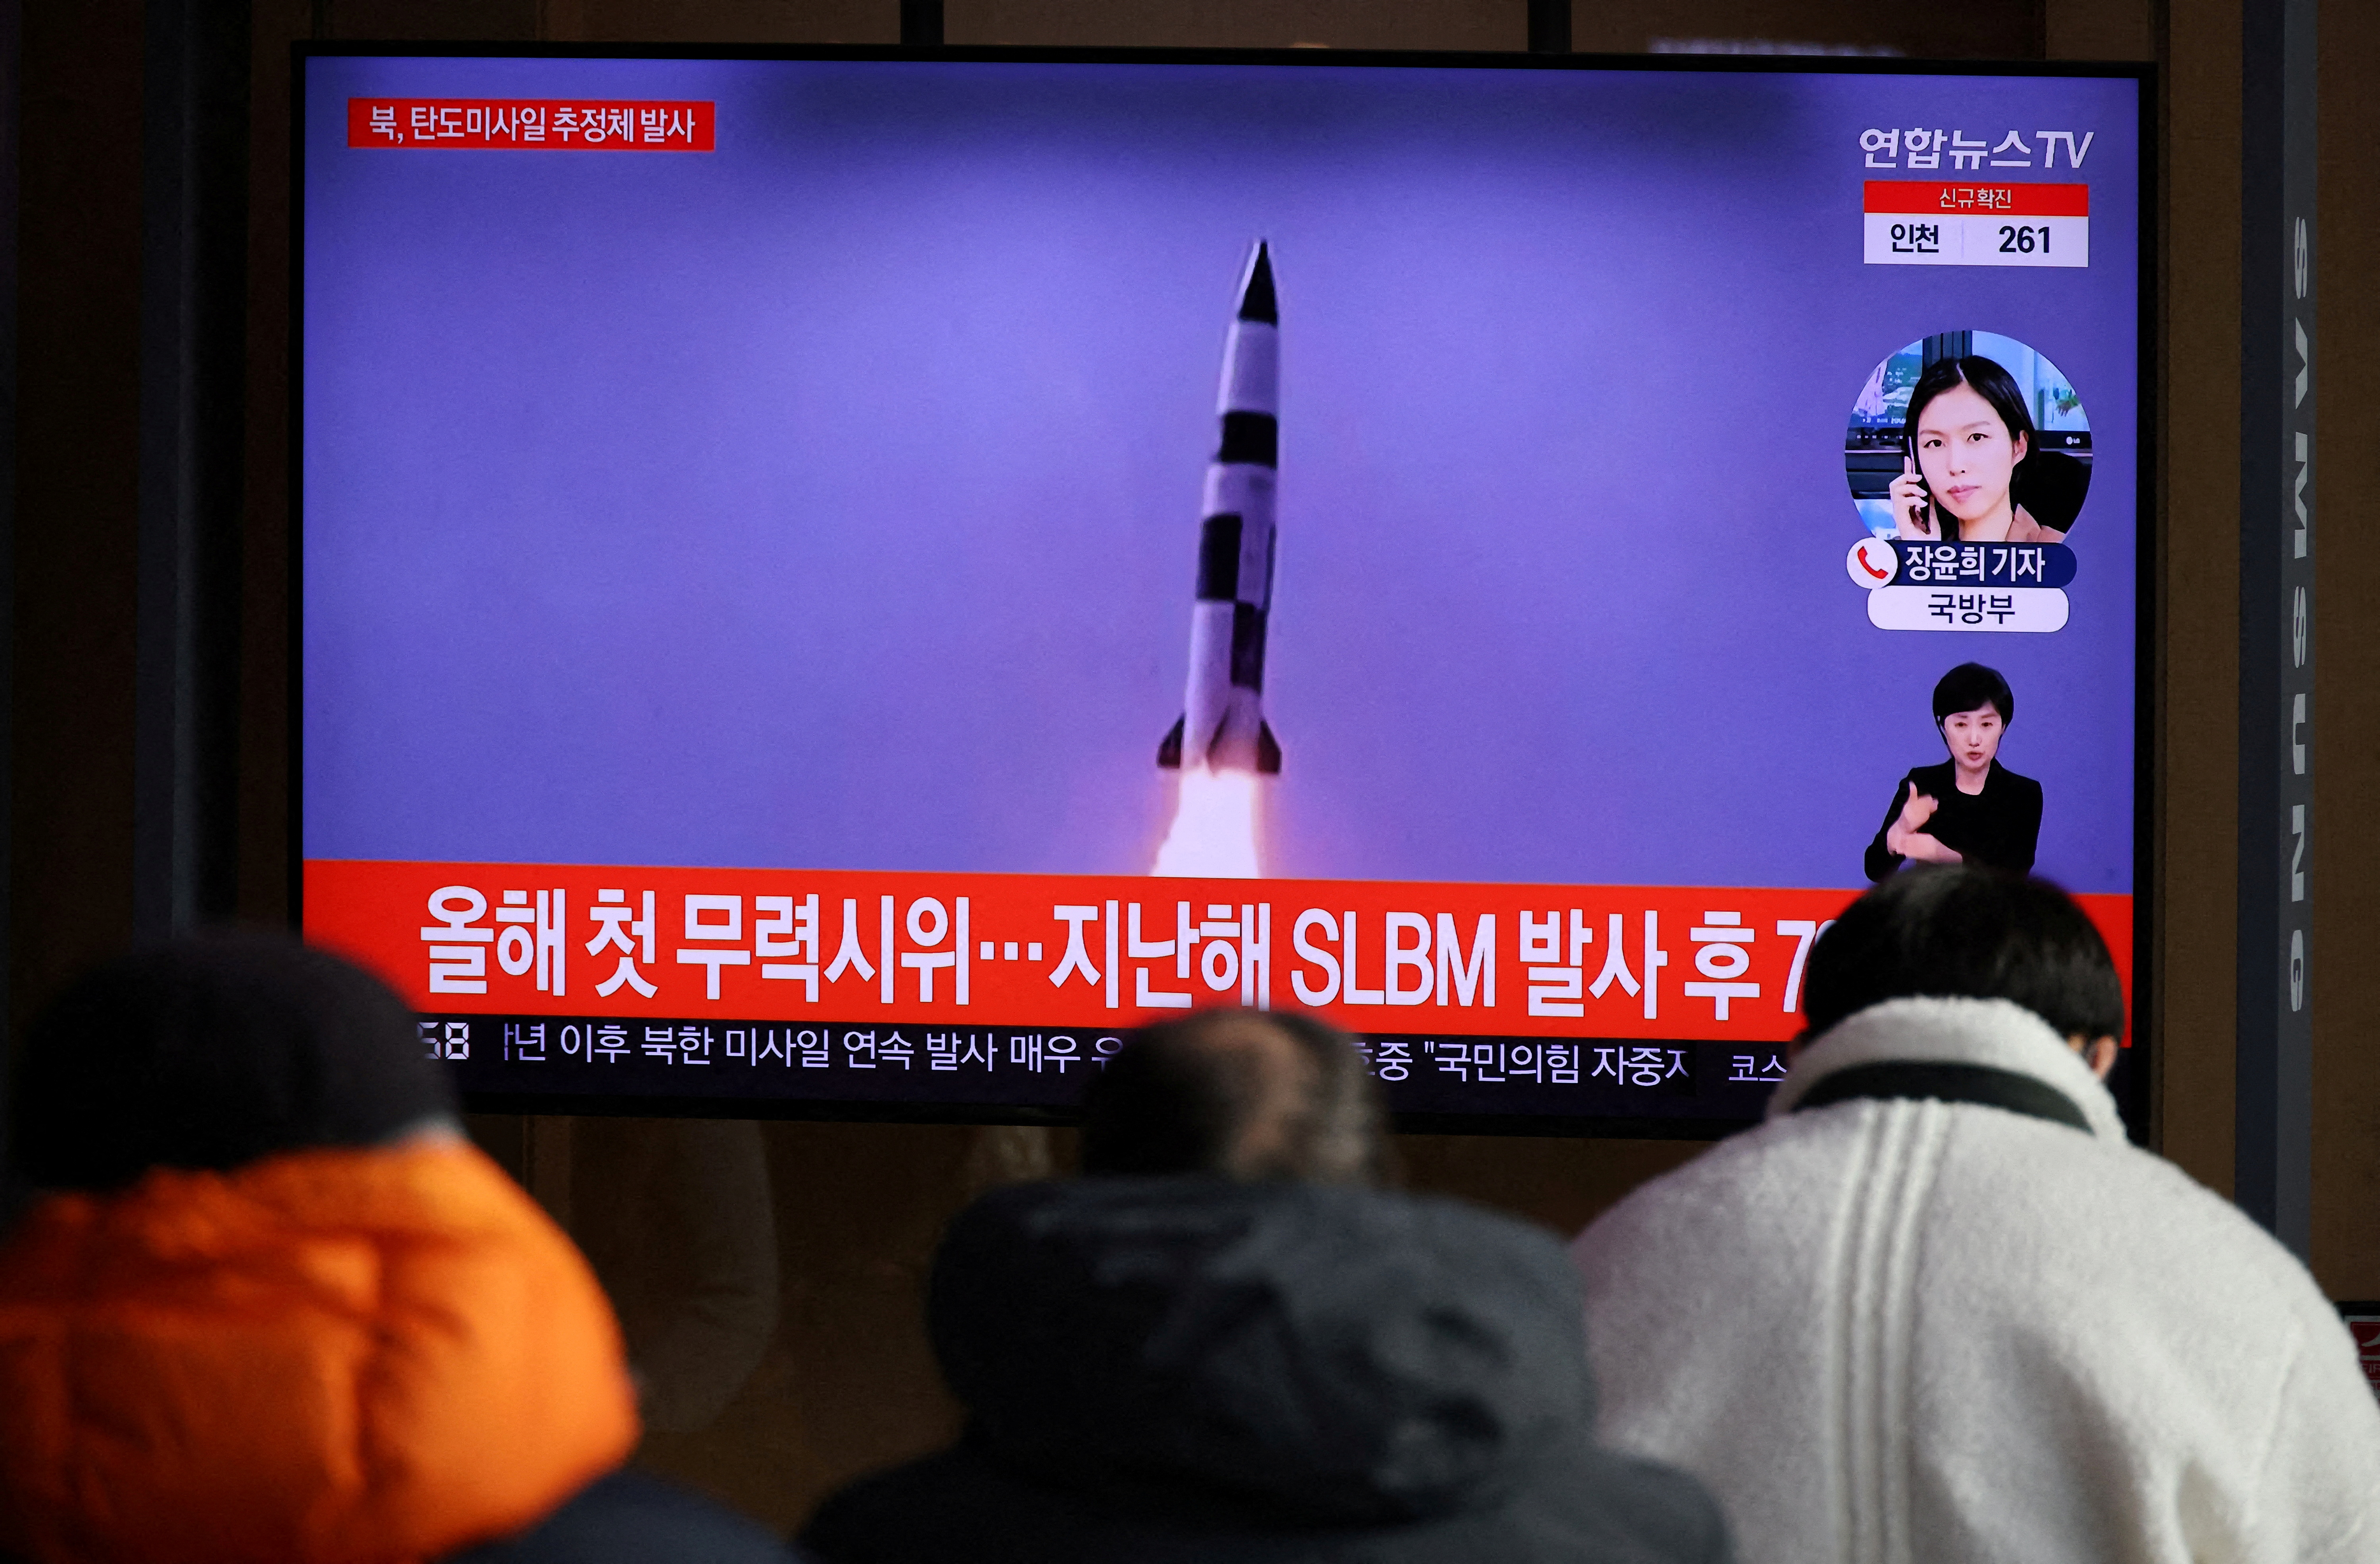 People watch a TV broadcasting file footage of a news report on North Korea firing a ballistic missile off its east coast in Seoul